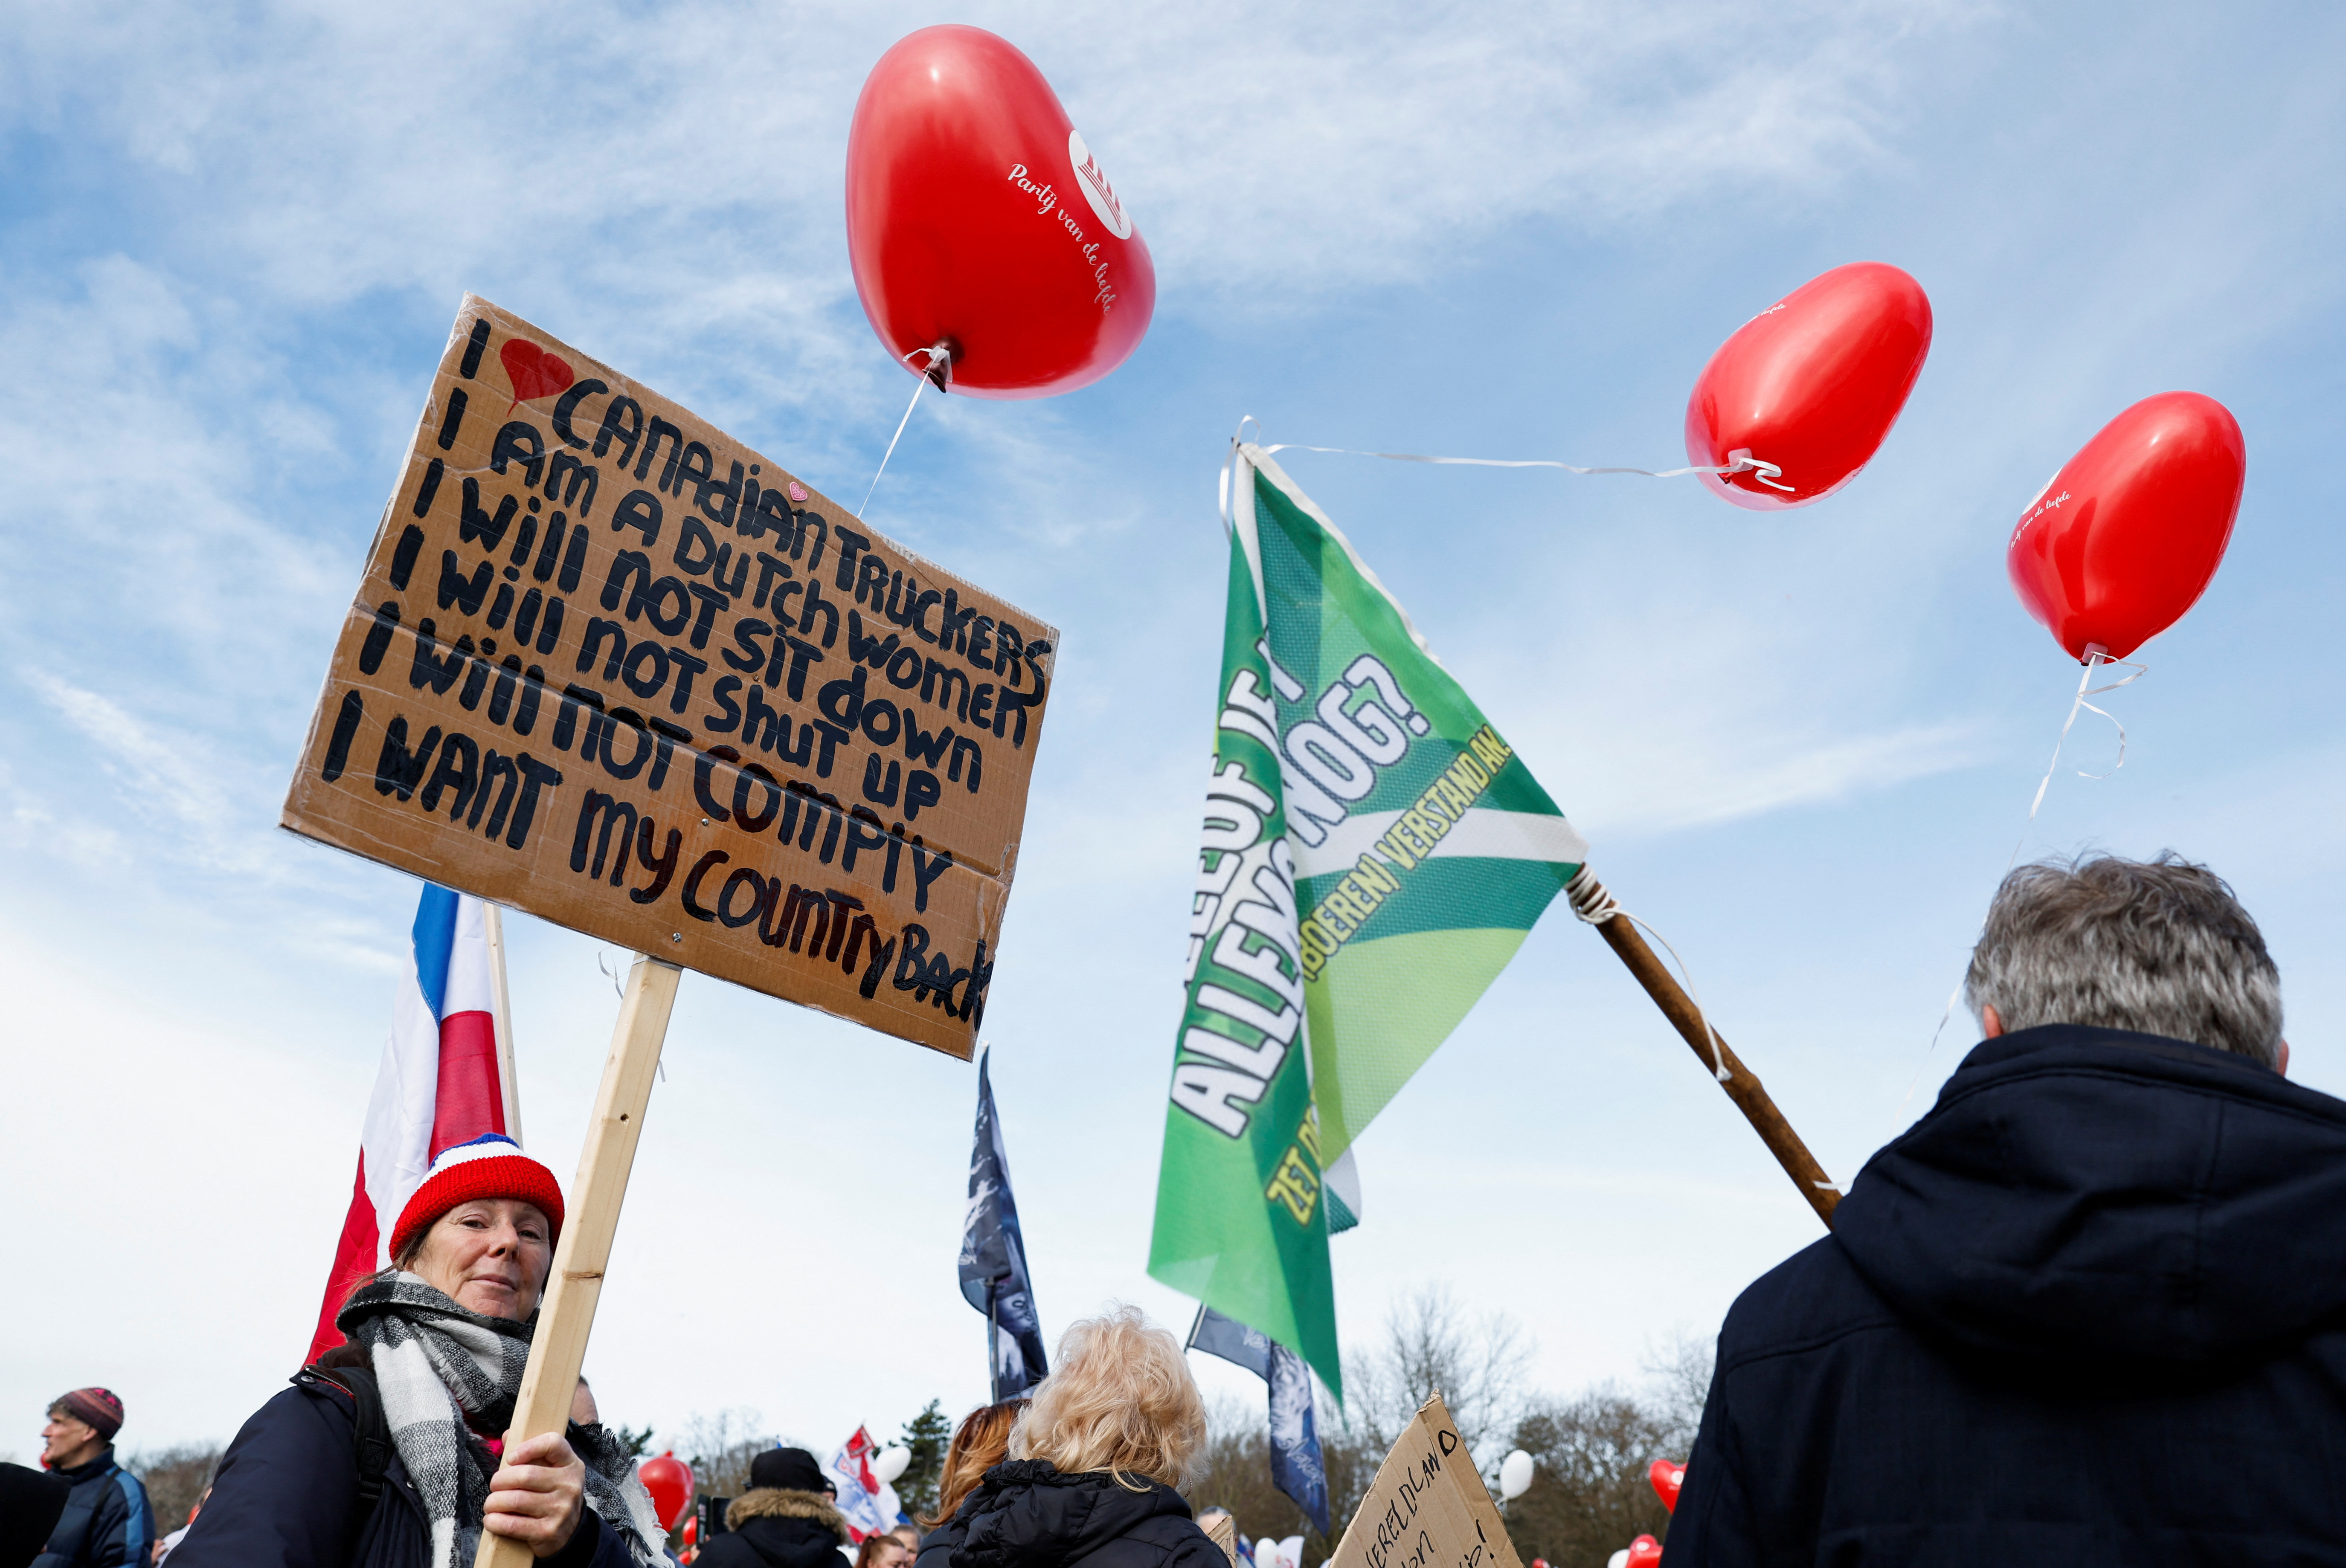 Dutch farmers protest against environmental policies in The Hague